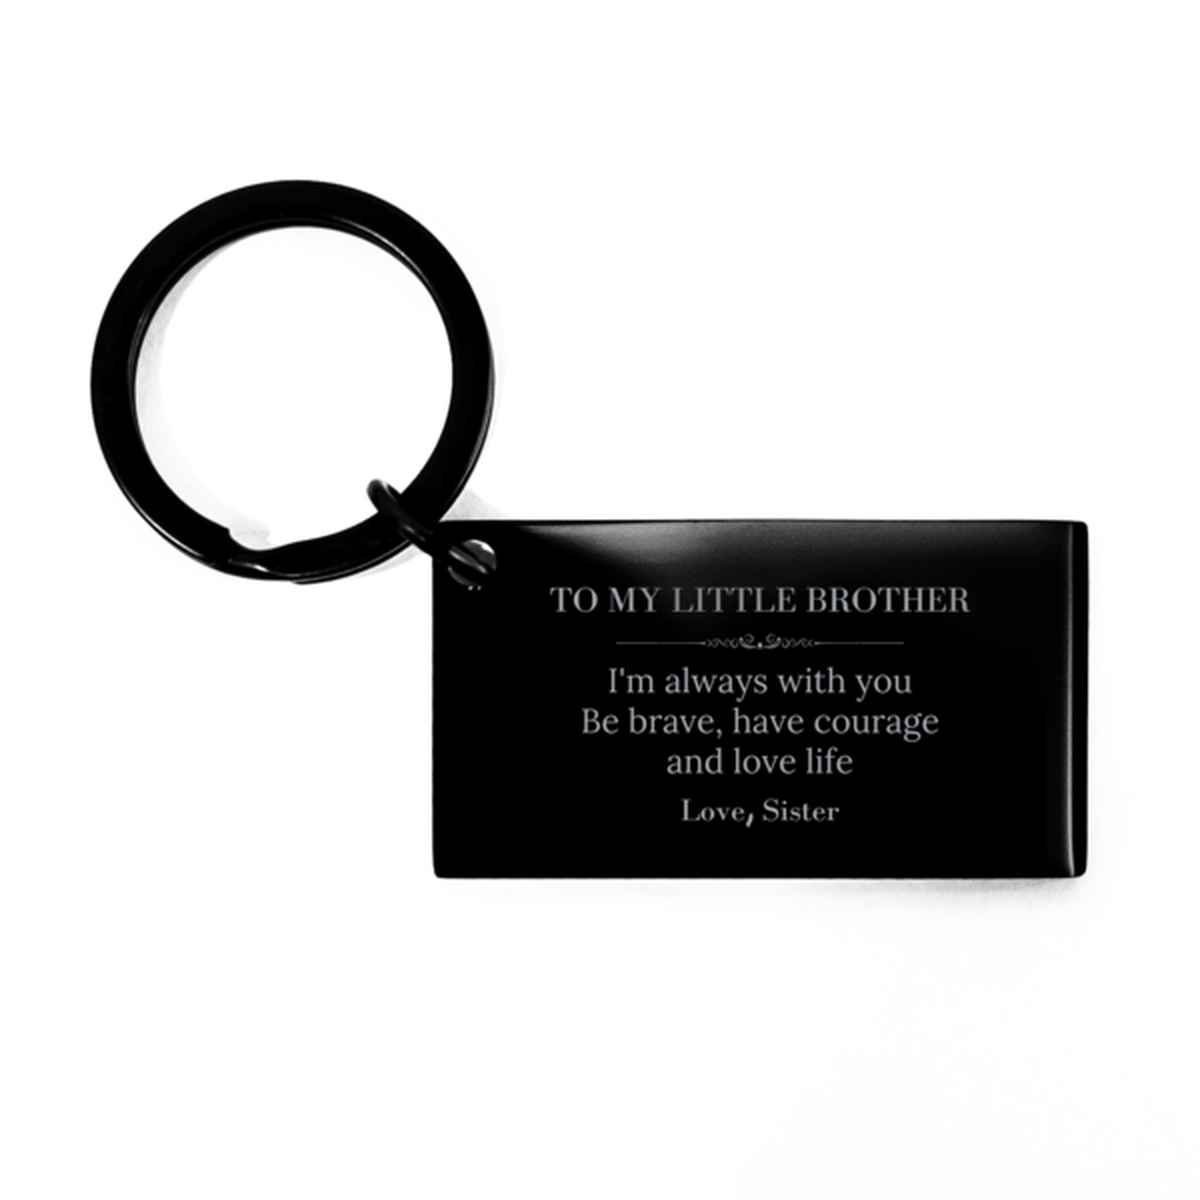 To My Little Brother Gifts from Sister, Unique Keychain Inspirational Christmas Birthday Graduation Gifts for Little Brother I'm always with you. Be brave, have courage and love life. Love, Sister